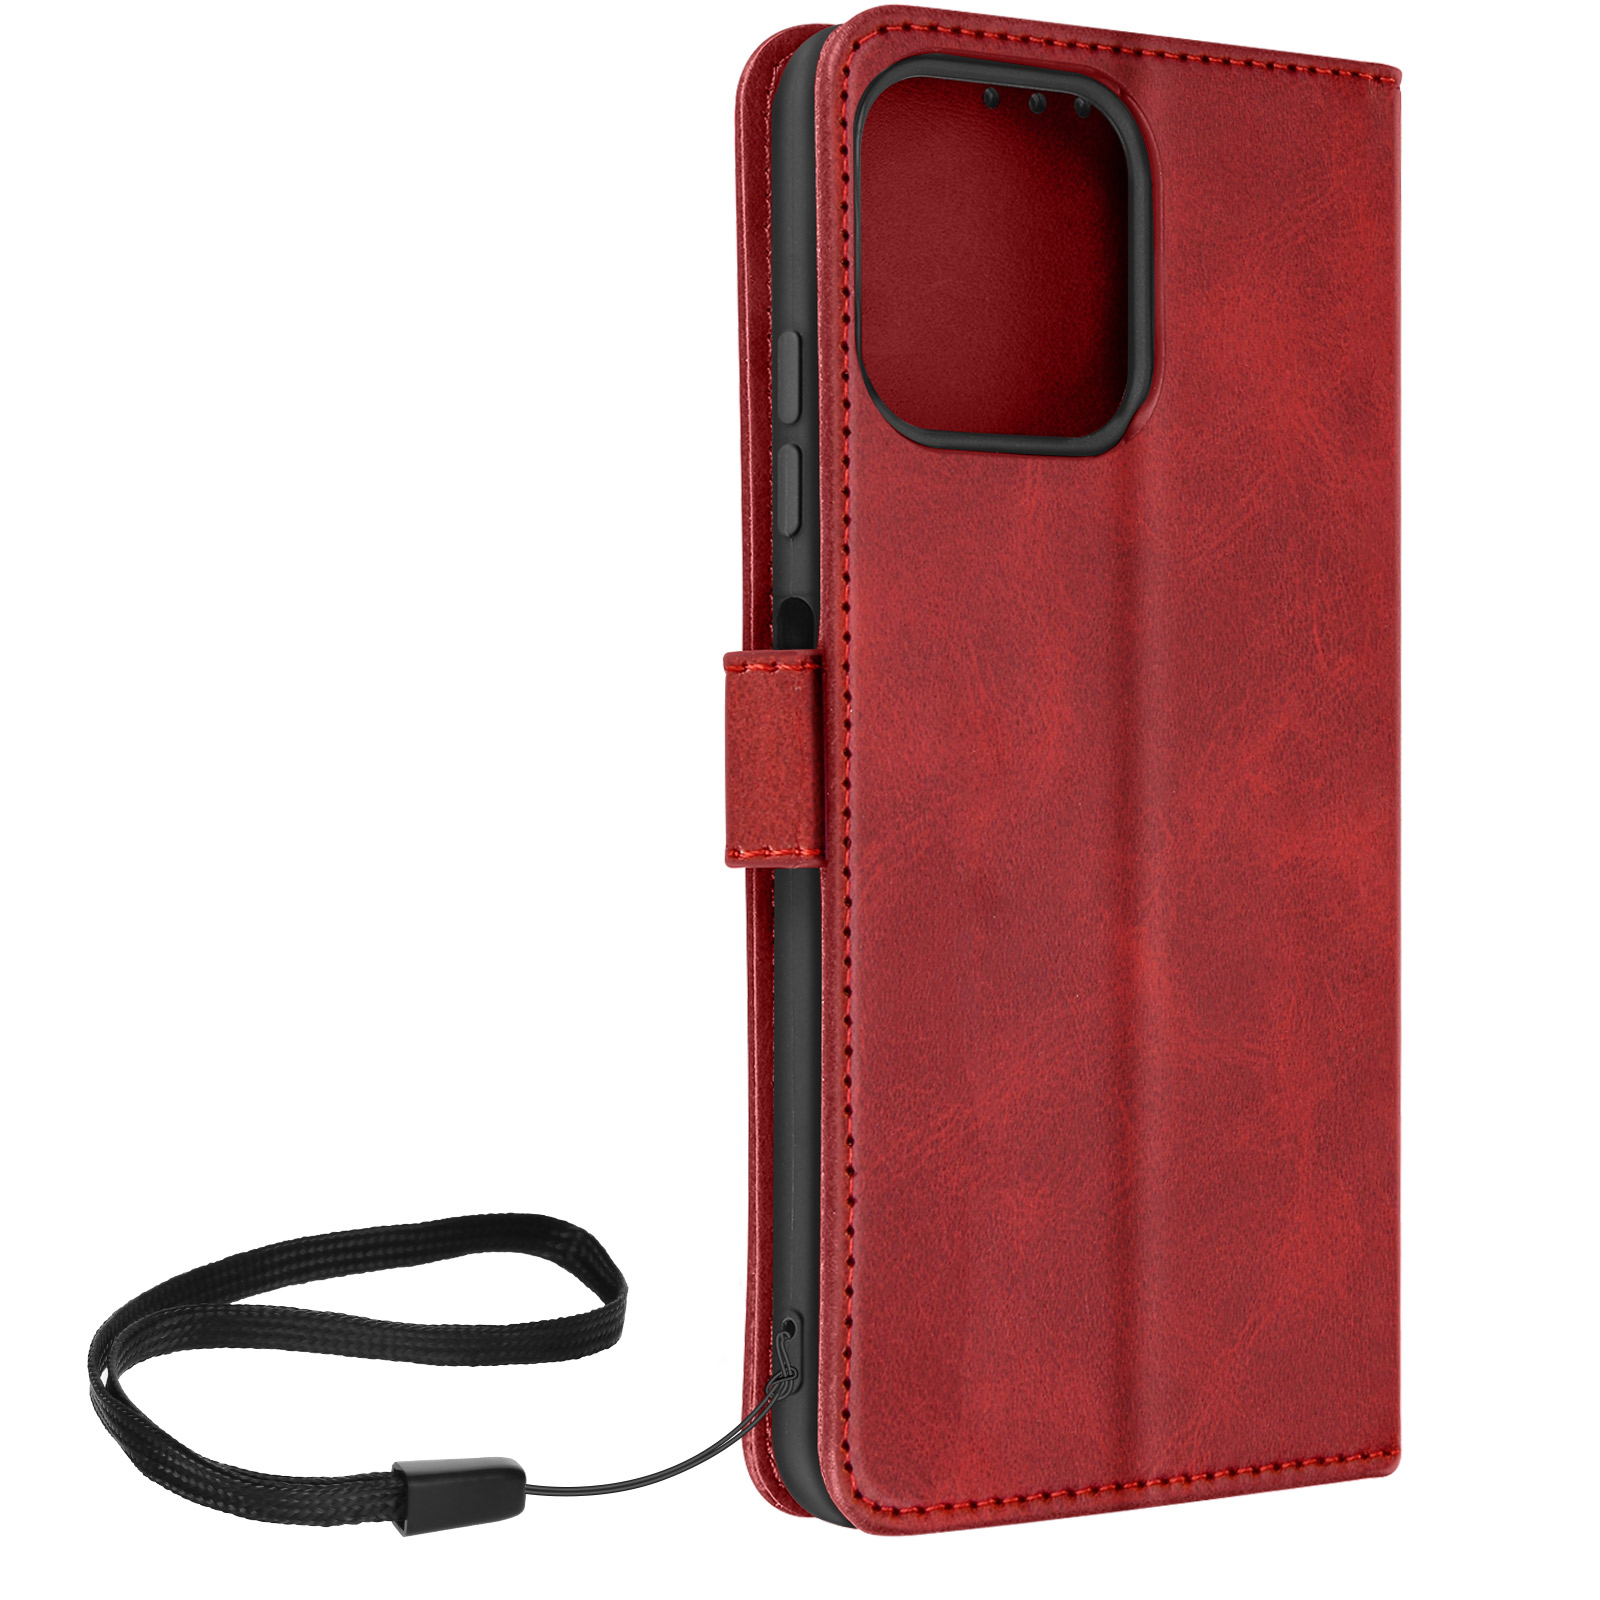 AVIZAR Bookstyle Series, Bookcover, 16 Note Ulefone, Pro, Rot